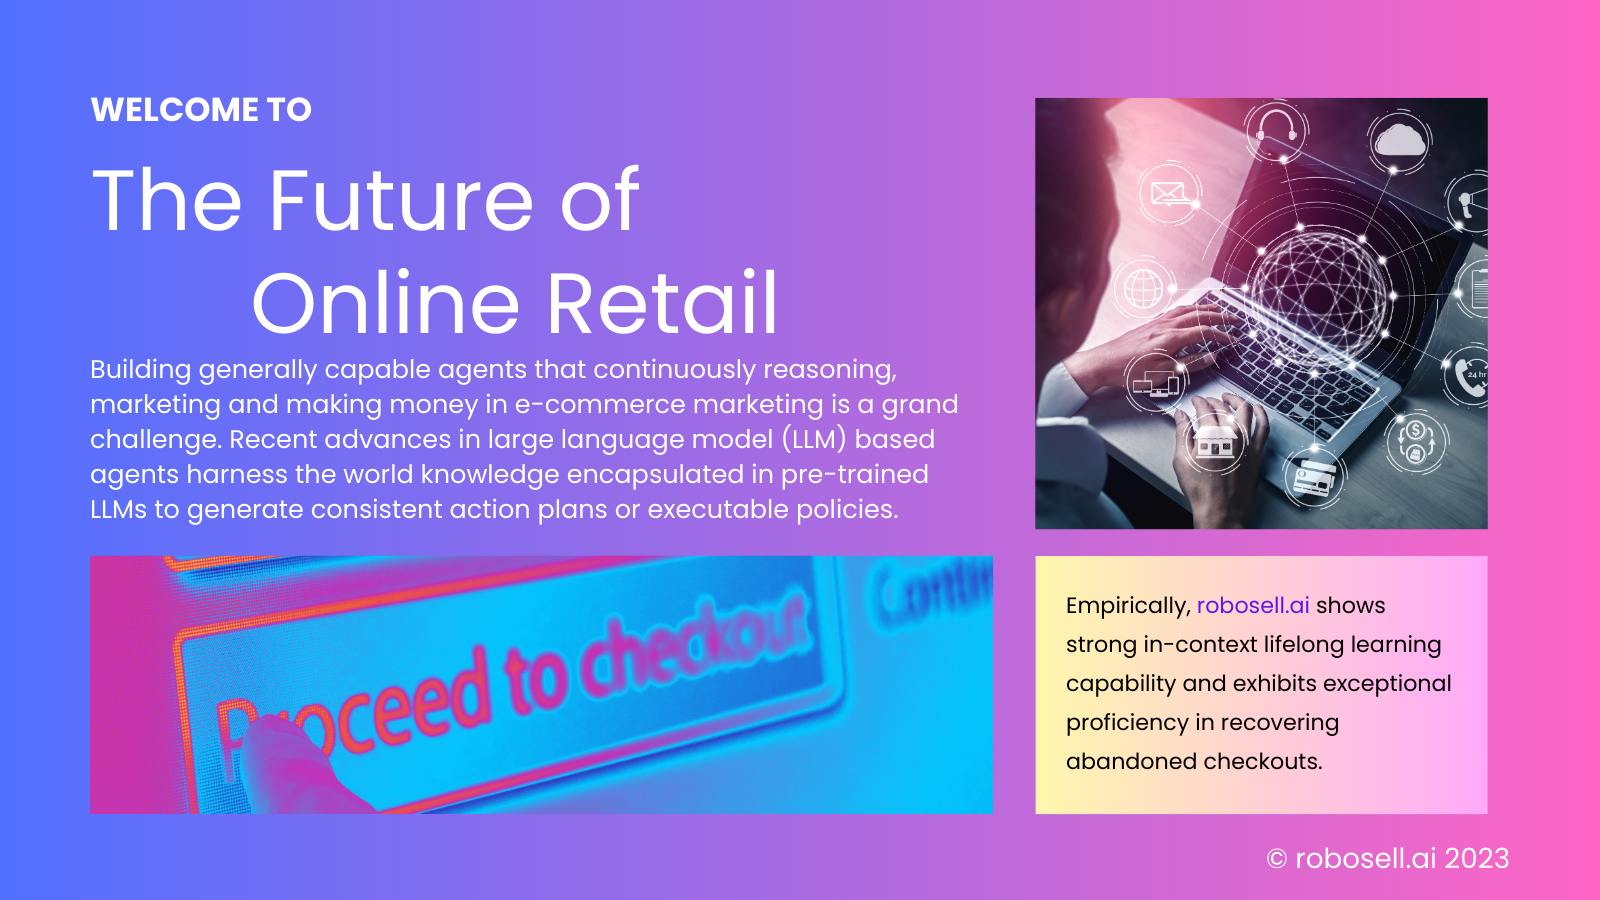 The Future of Online Retail